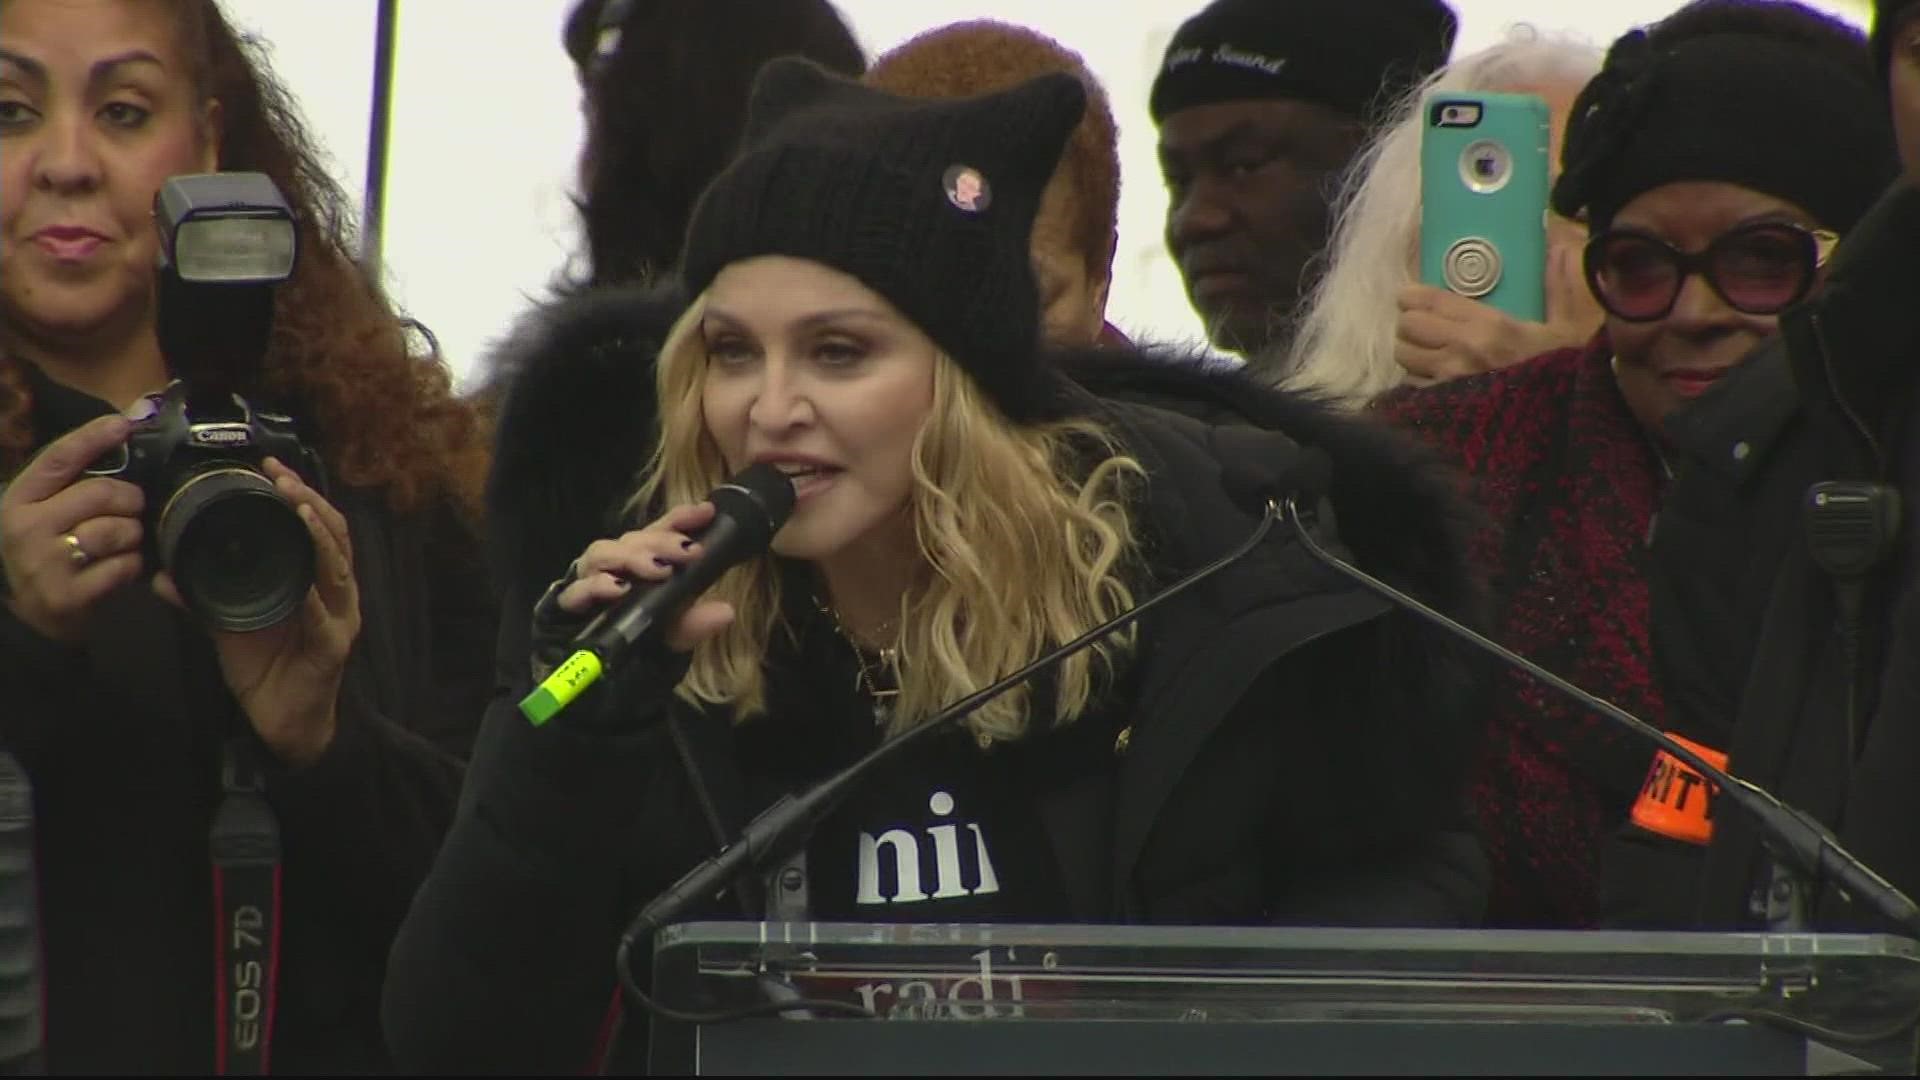 Madonna will “Take a Bow” with a new tour through North America and Europe starting this summer that will be a “Celebration” of the pop icon's hits.